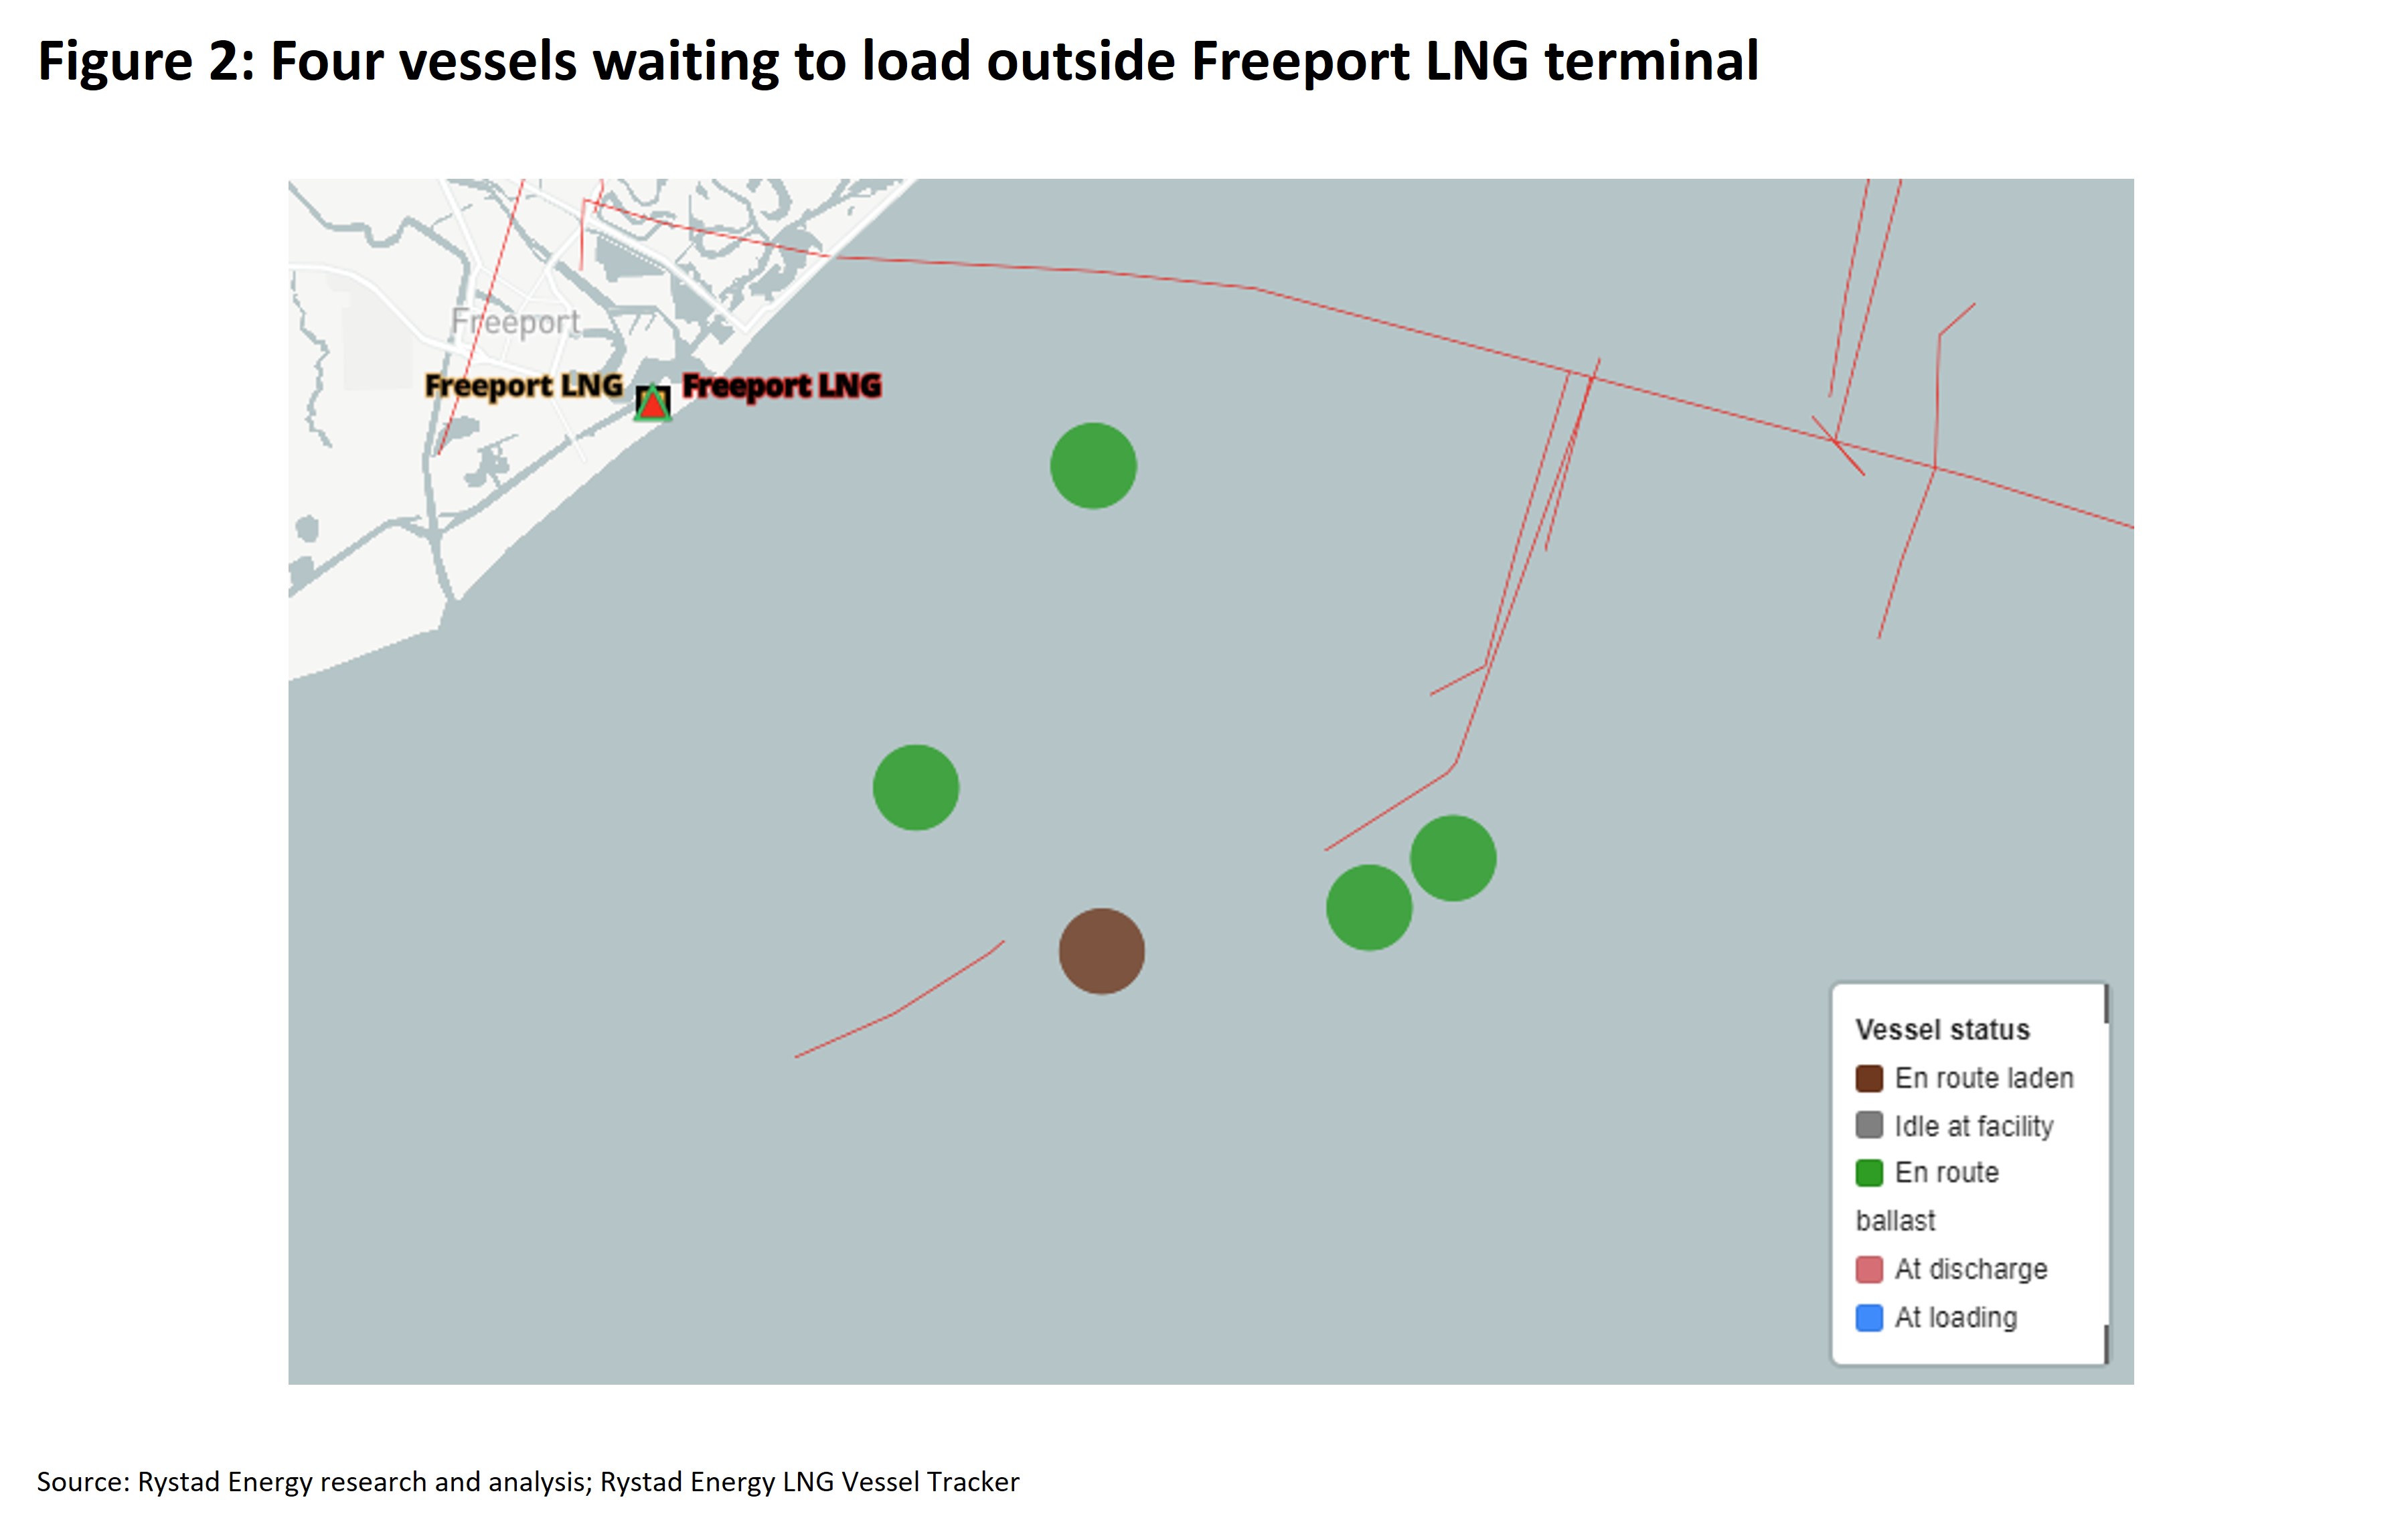 Vessels waiting for Freeport